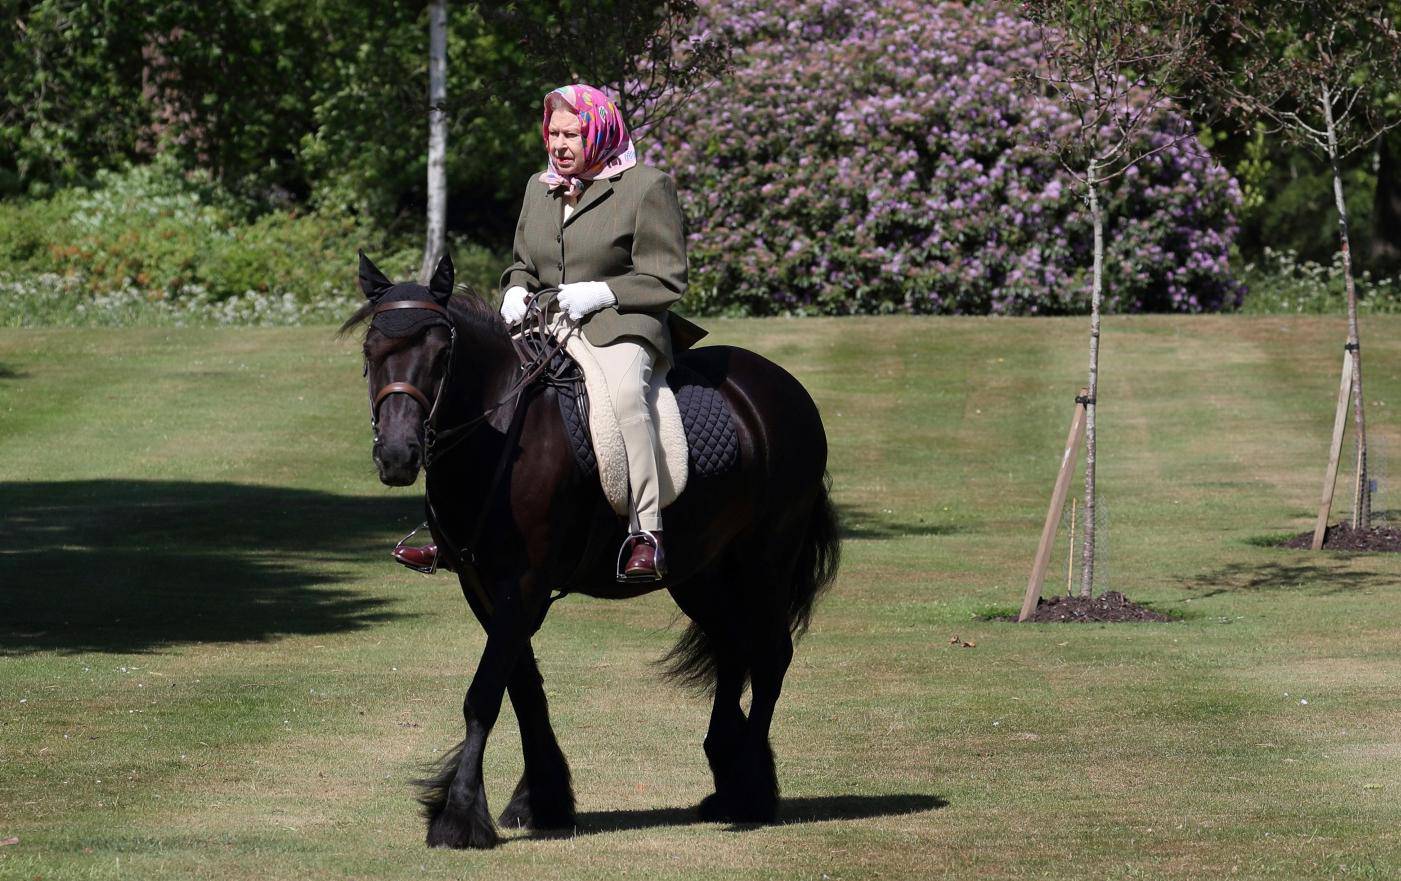 Britain's Queen Elizabeth II rides Balmoral Fern, a 14-year-old Fell pony, in Windsor Home Park